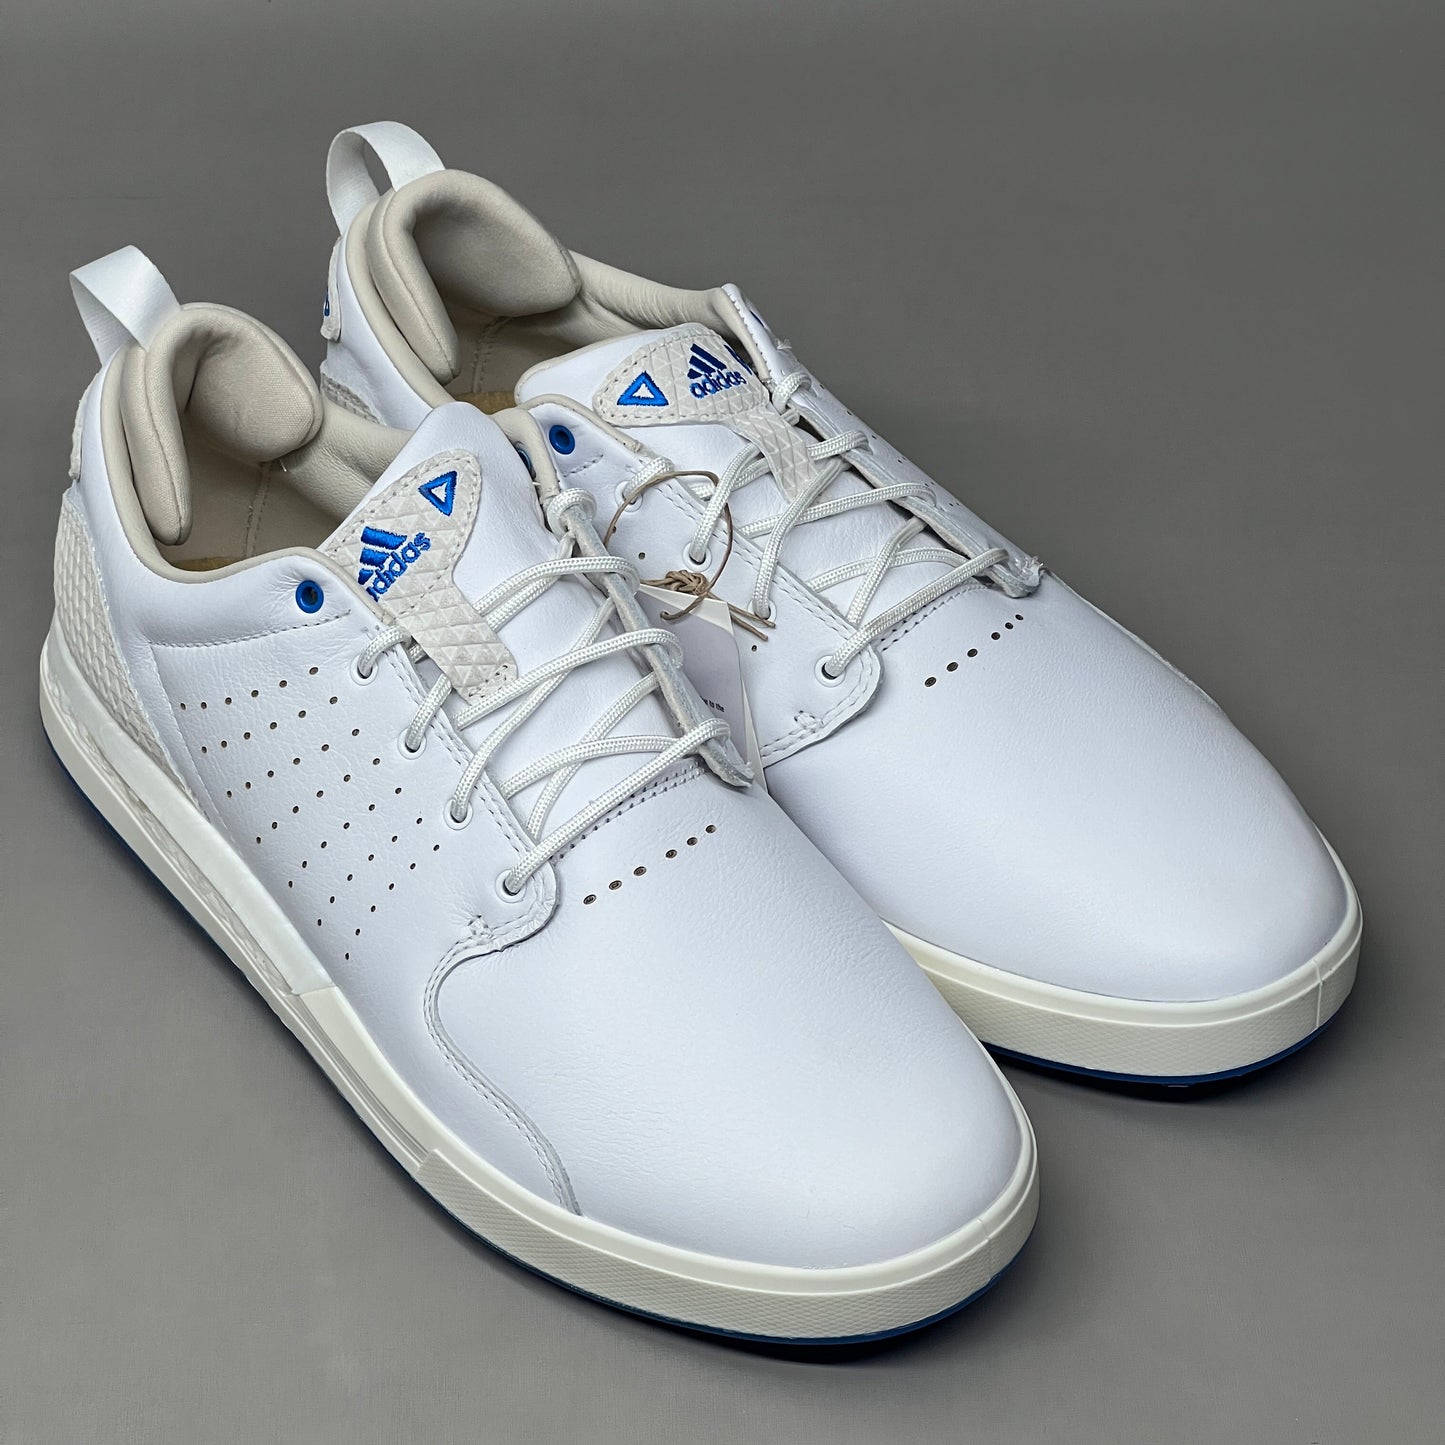 ADIDAS Flopshot Golf Shoes Waterproof Leather Men's Sz 12 White / Gold / Blue GV9668 (New)